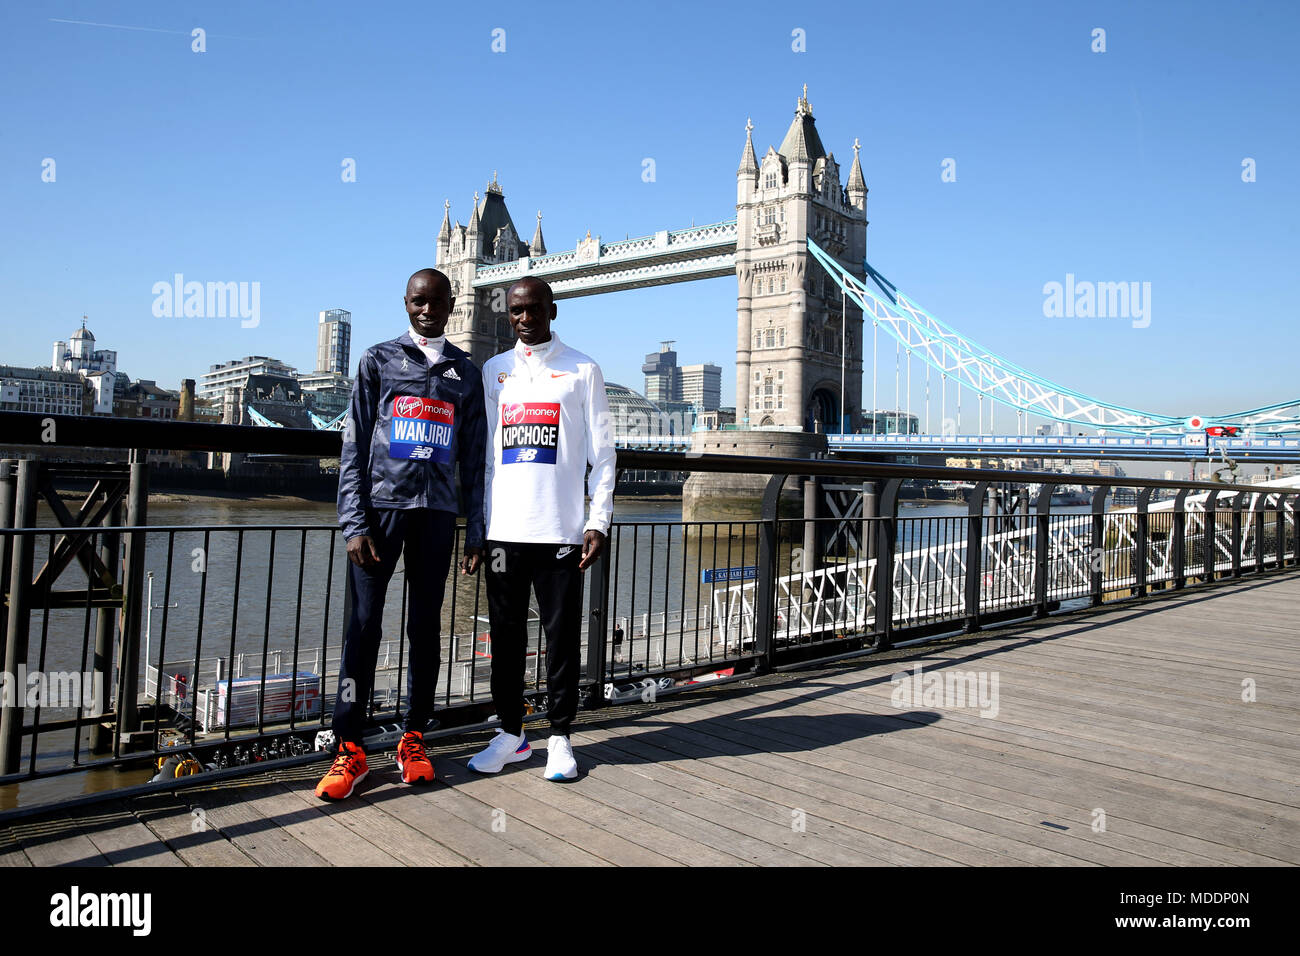 Kenya's Daniel Wanjiru (left) and Eliud Kipchoge pose for a picture in front of Tower Bridge during the media day at the Tower Hotel, London. PRESS ASSOCIATION Photo. Picture date: Thursday April 19, 2018. See PA story ATHLETICS Marathon. Photo credit should read: Steven Paston/PA Wire Stock Photo